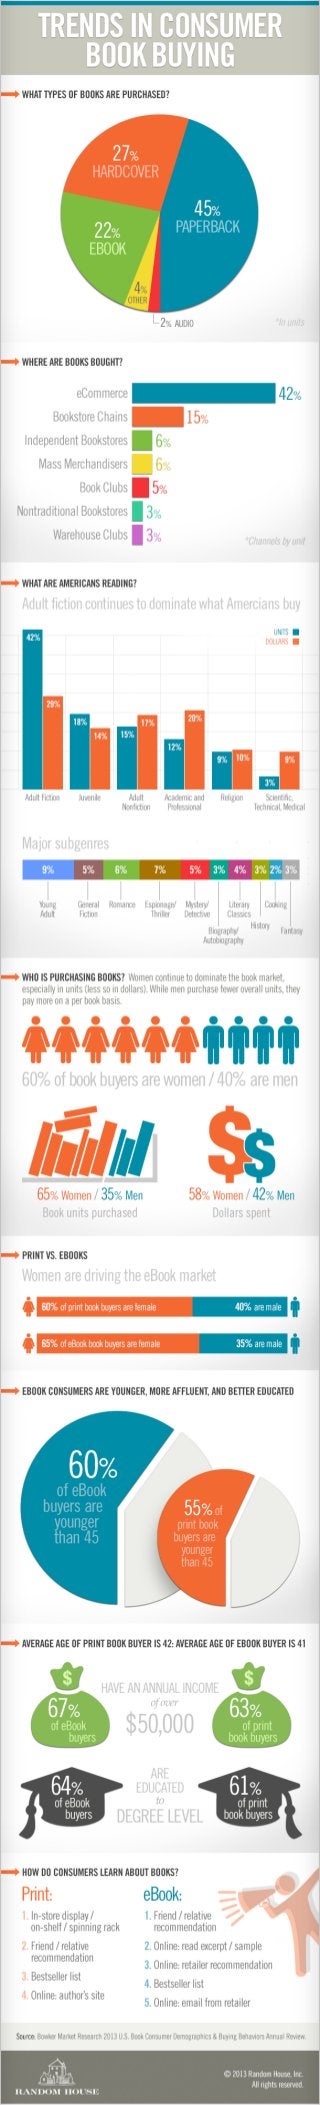 Trends in Consumer Book Buying [Infographic]